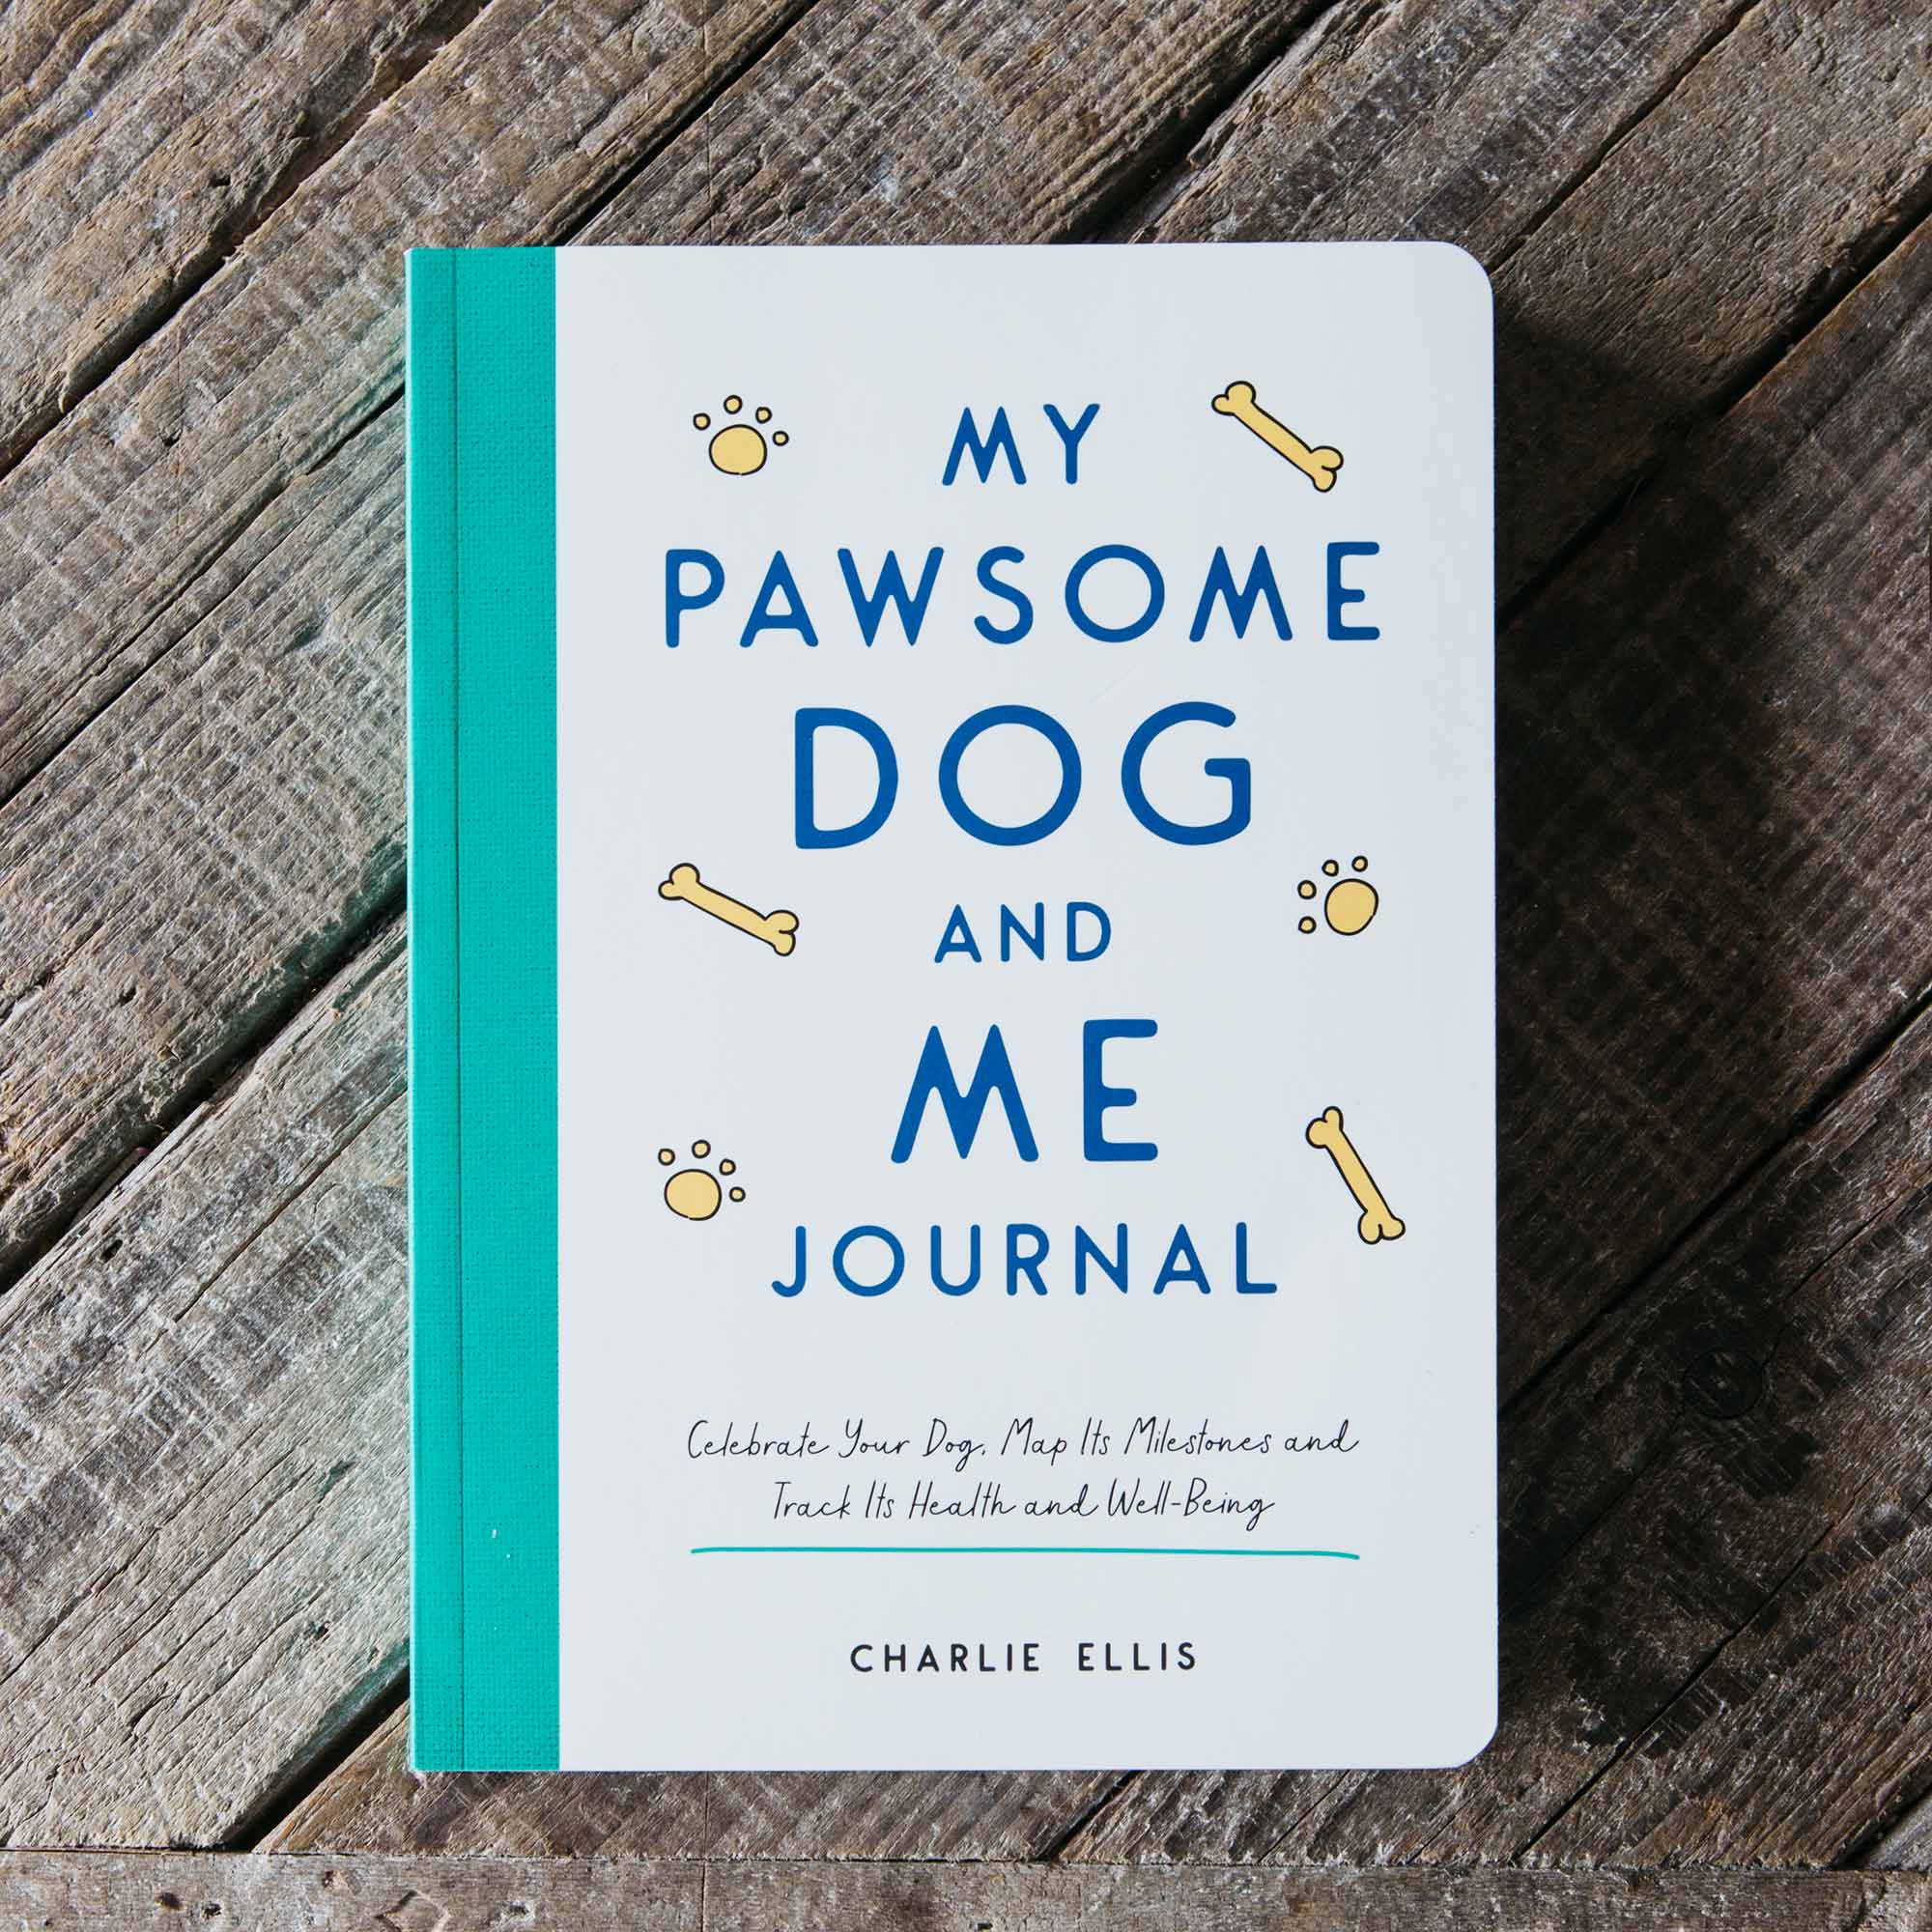 Photo of Graham and green my pawsome dog and me journal book